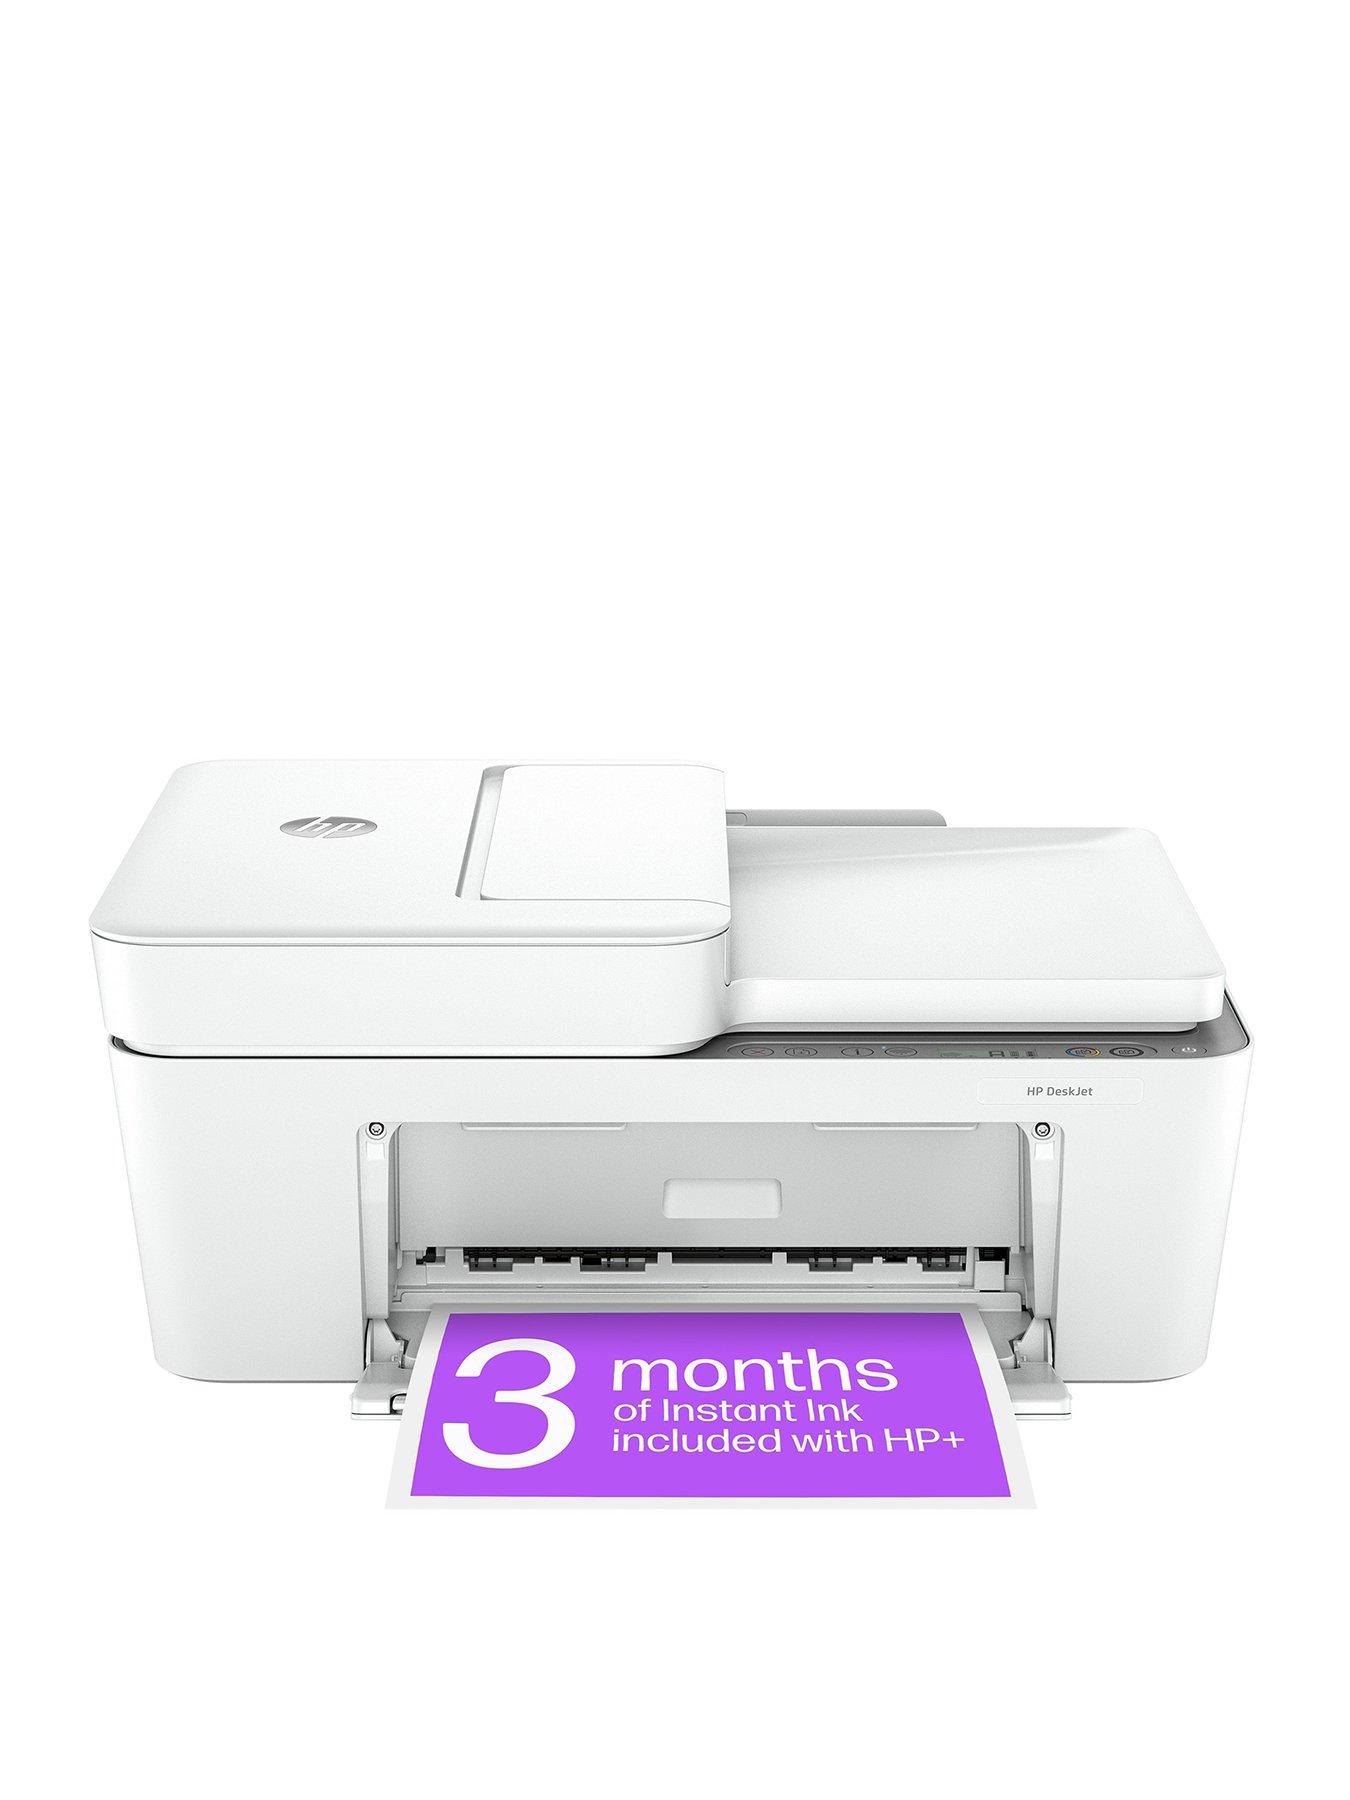 Print Brother Dcp-j1800dw Mfc-ink A4 - Imprimante